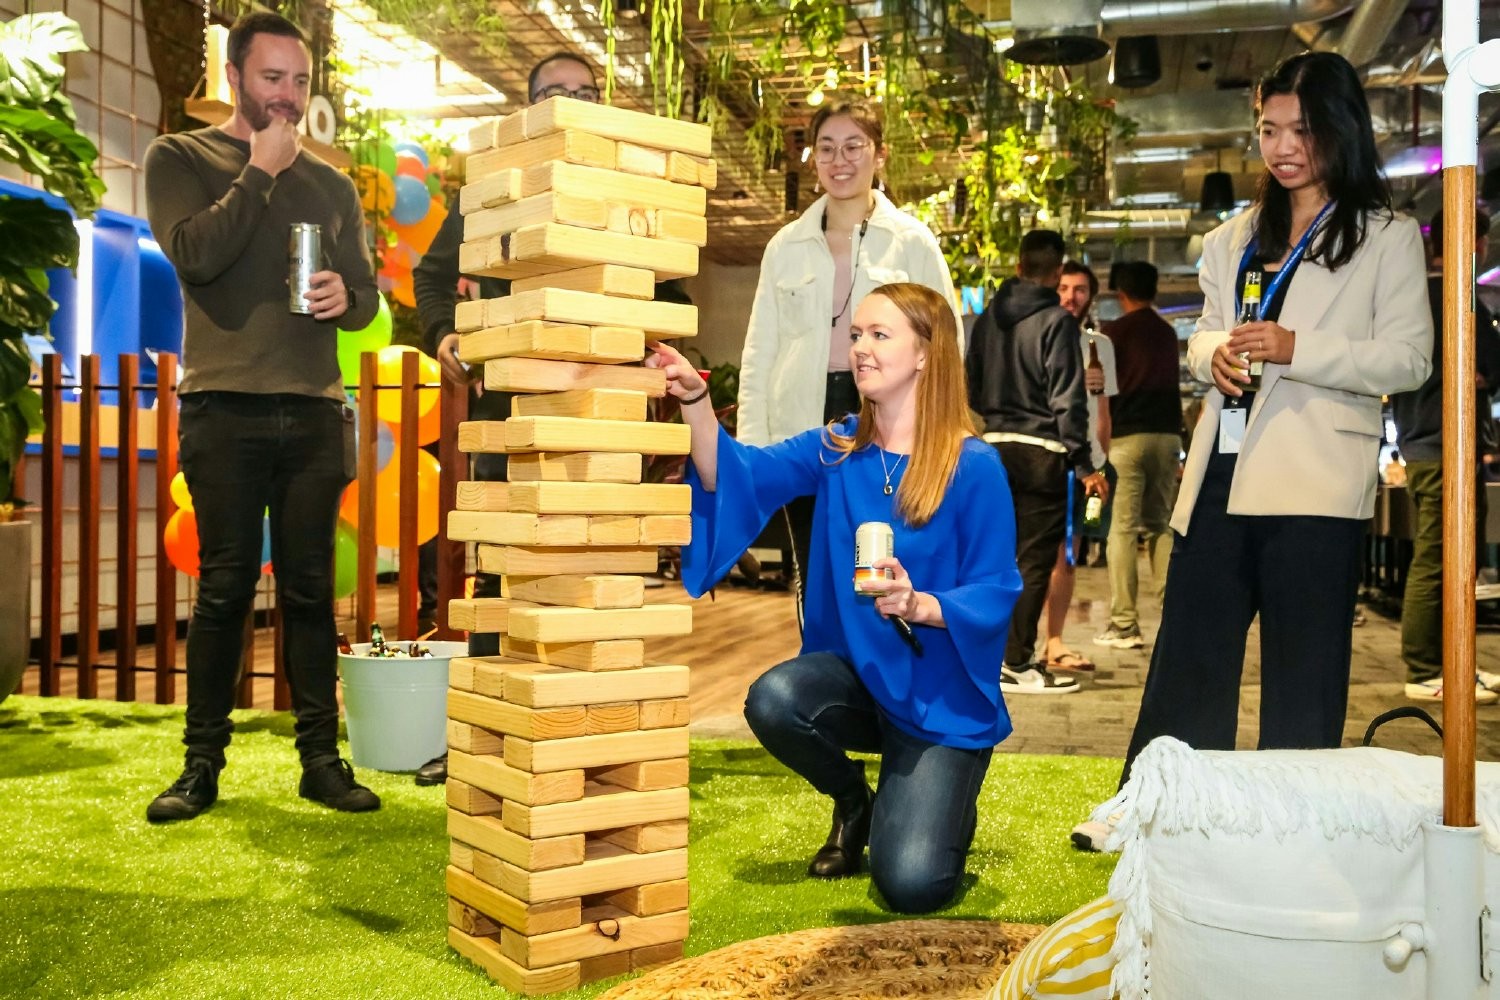 Employees enjoying a friendly game of giant Jenga during an office party.  